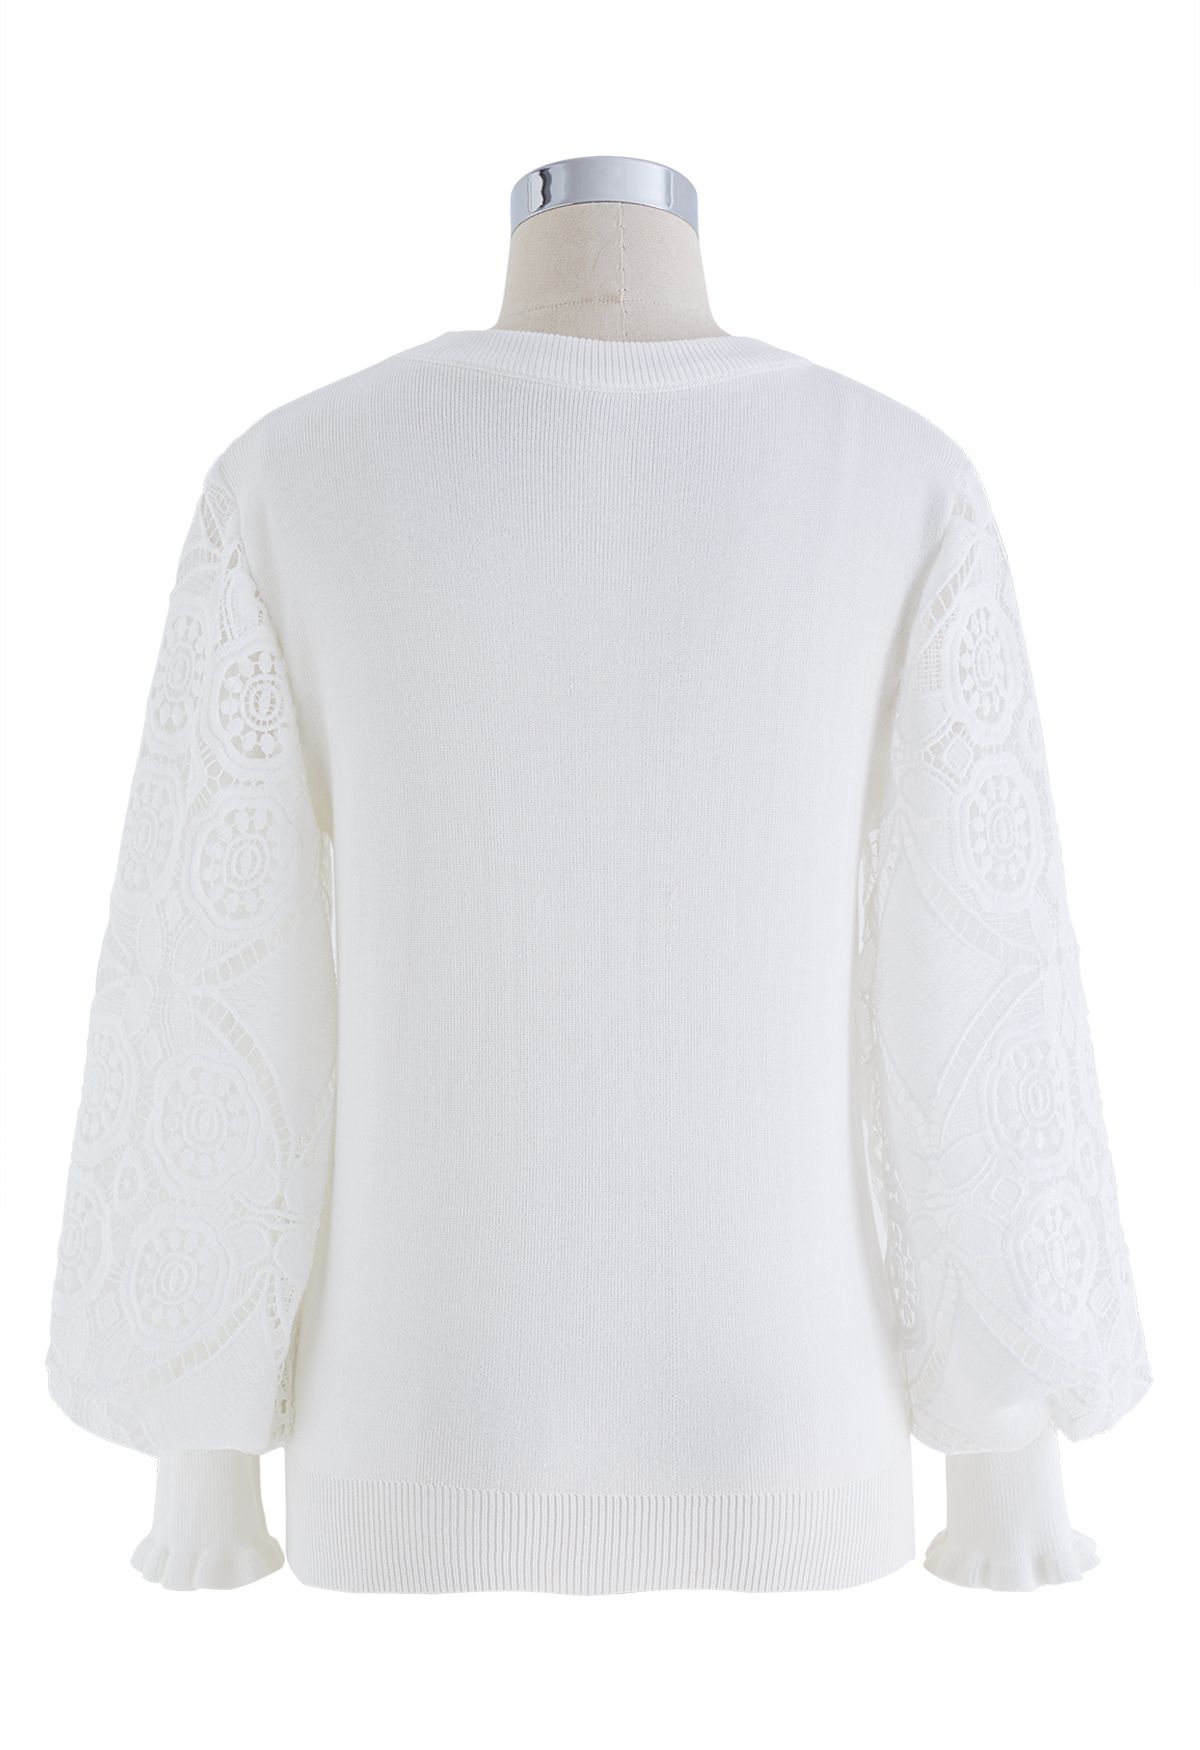 Floral Crochet Sleeve Knit Top in White